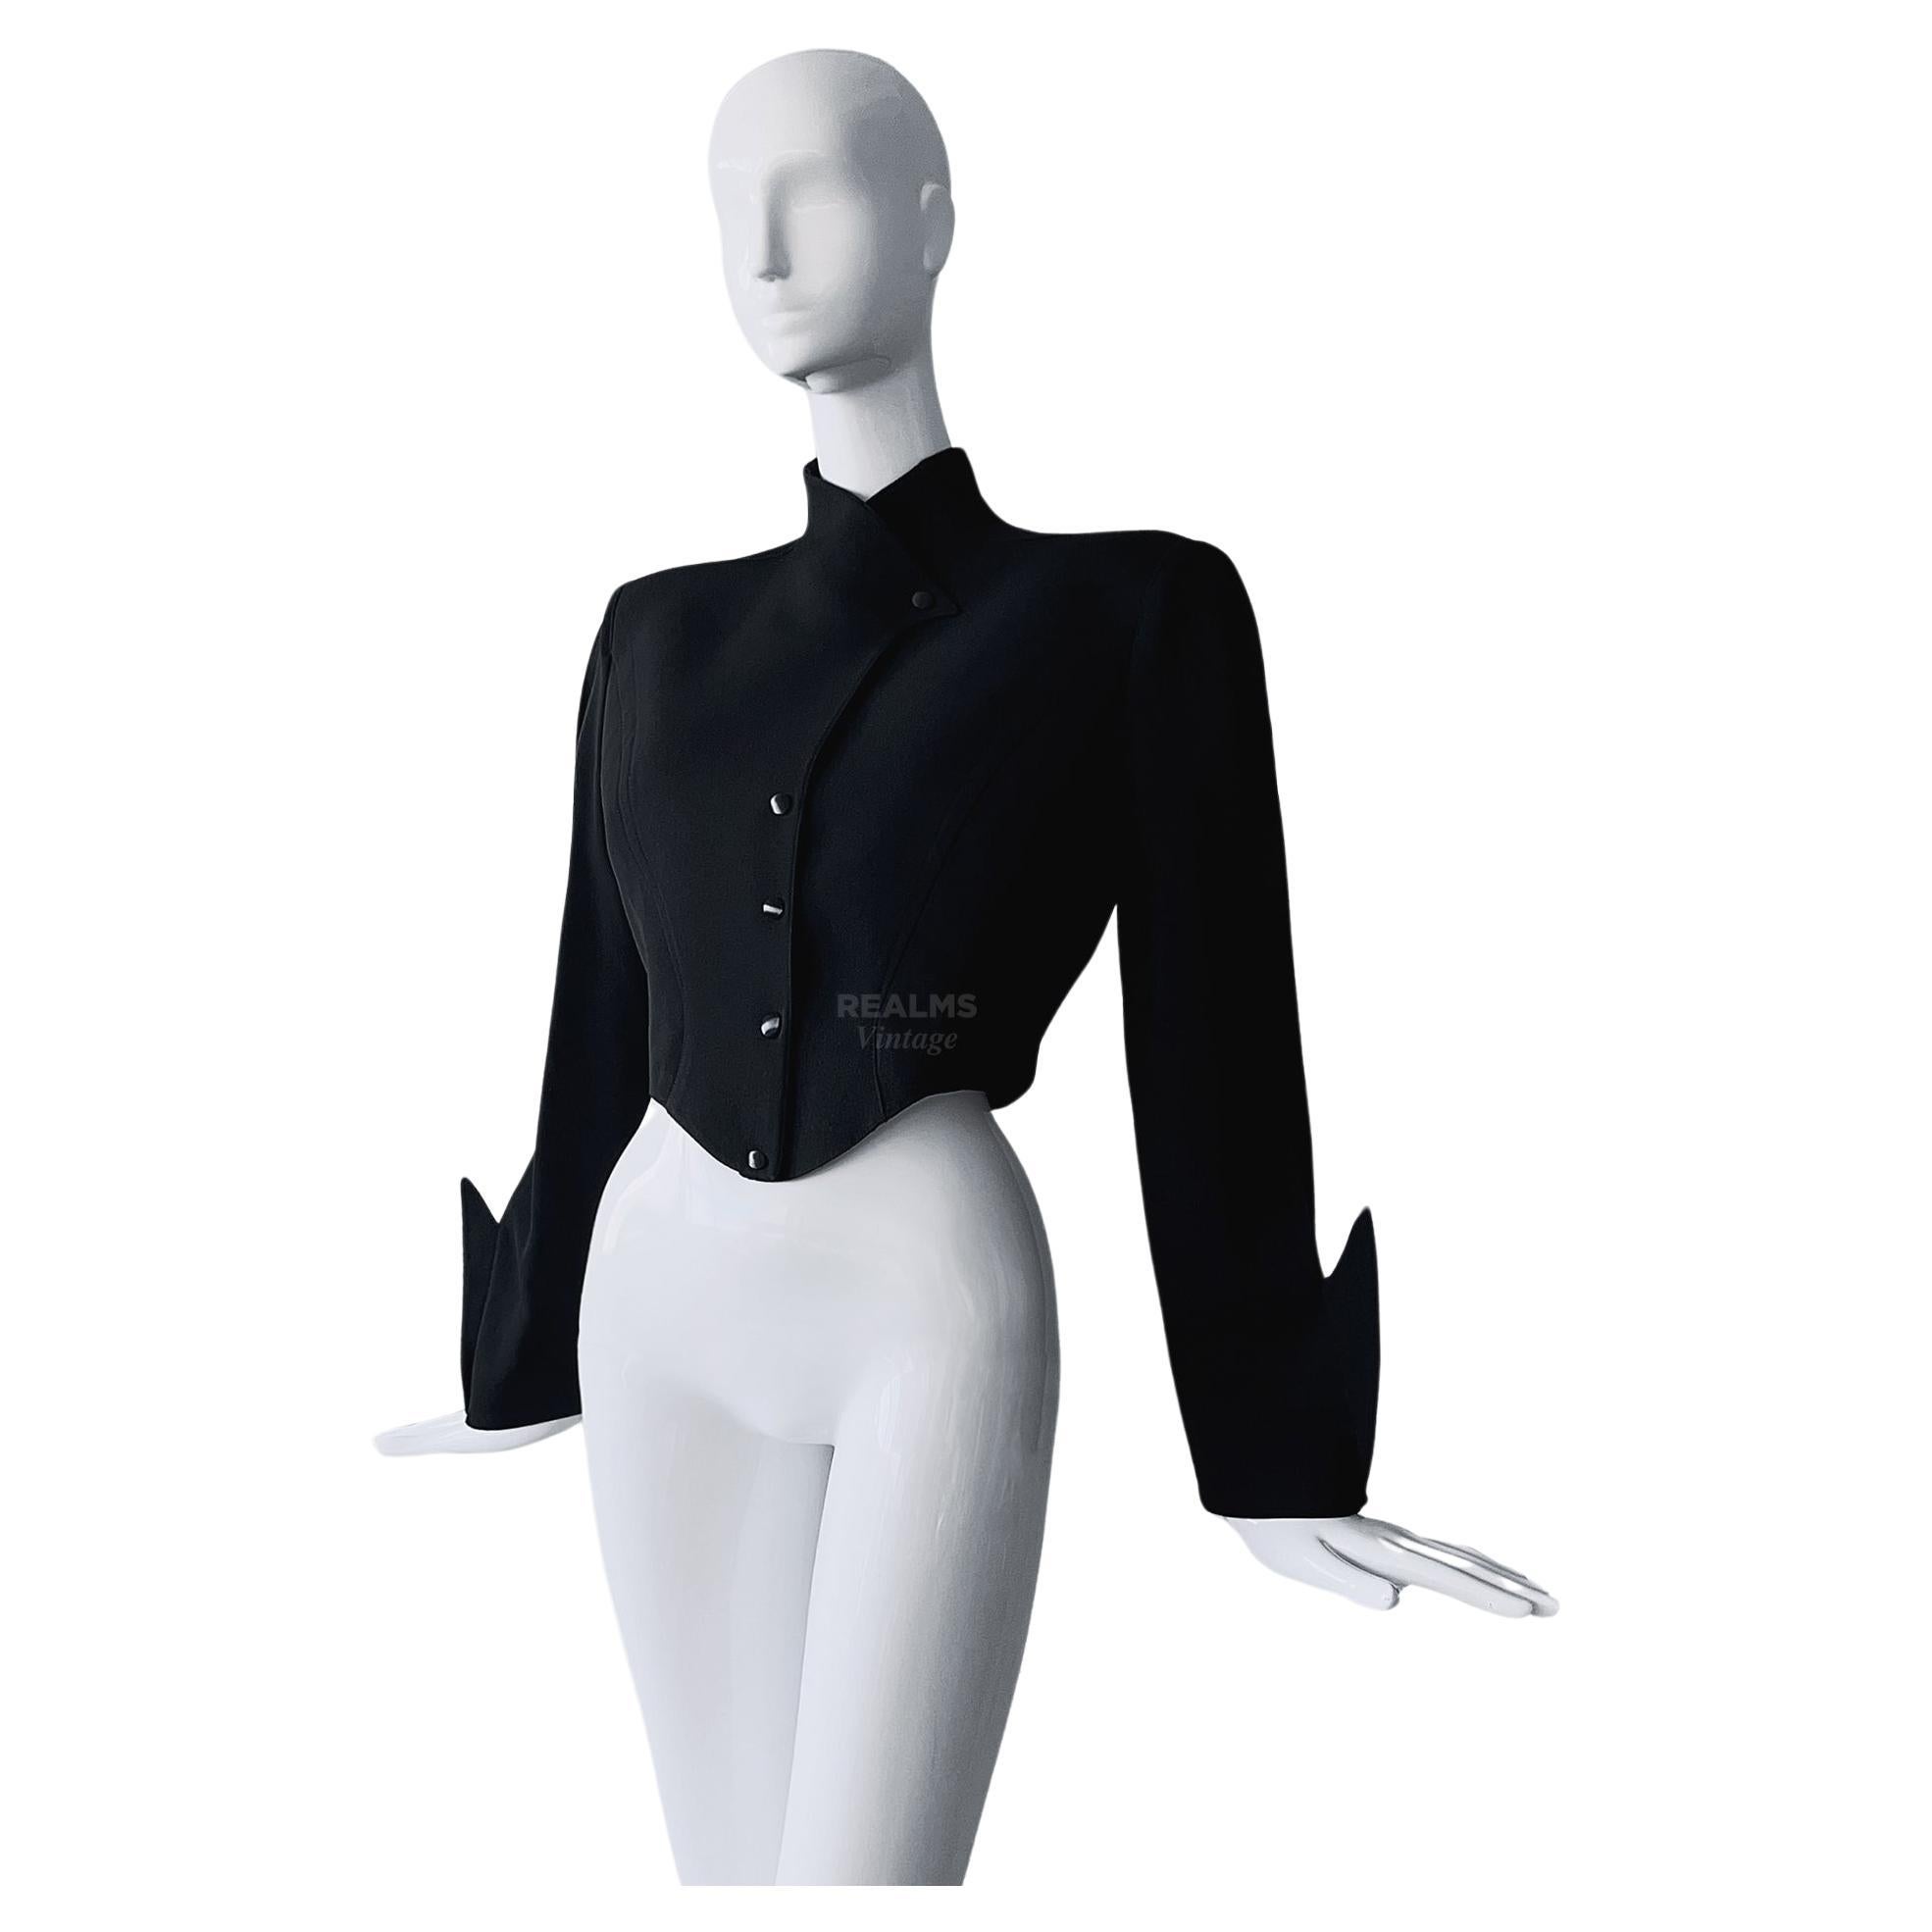 Thierry Mugler FW1988/89 Rare Black Cropped Jacket Shark Fin For Sale